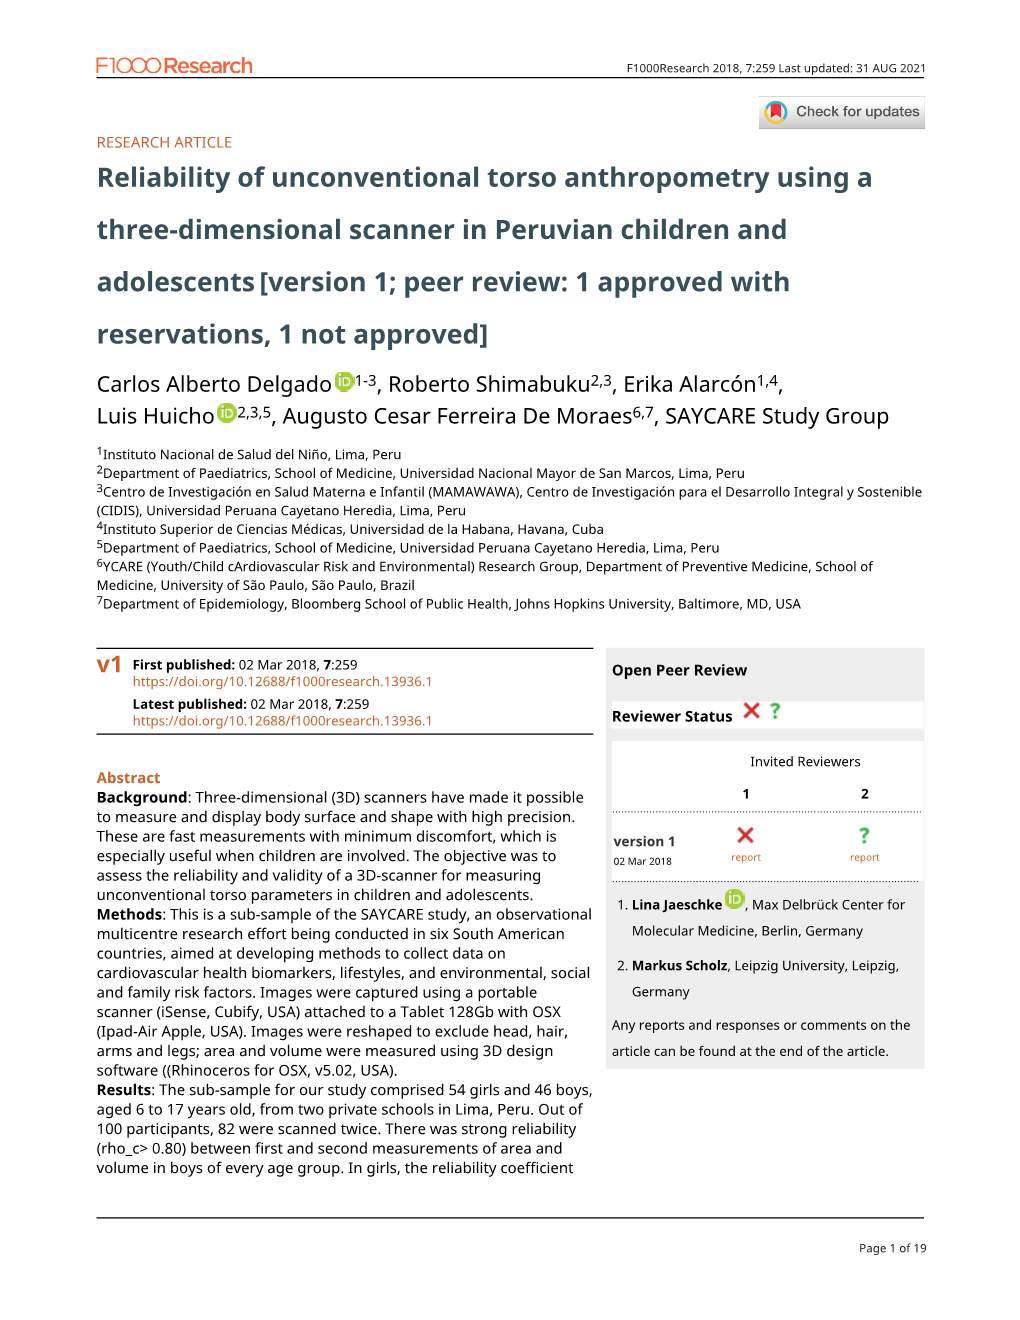 Reliability of Unconventional Torso Anthropometry Using a Three